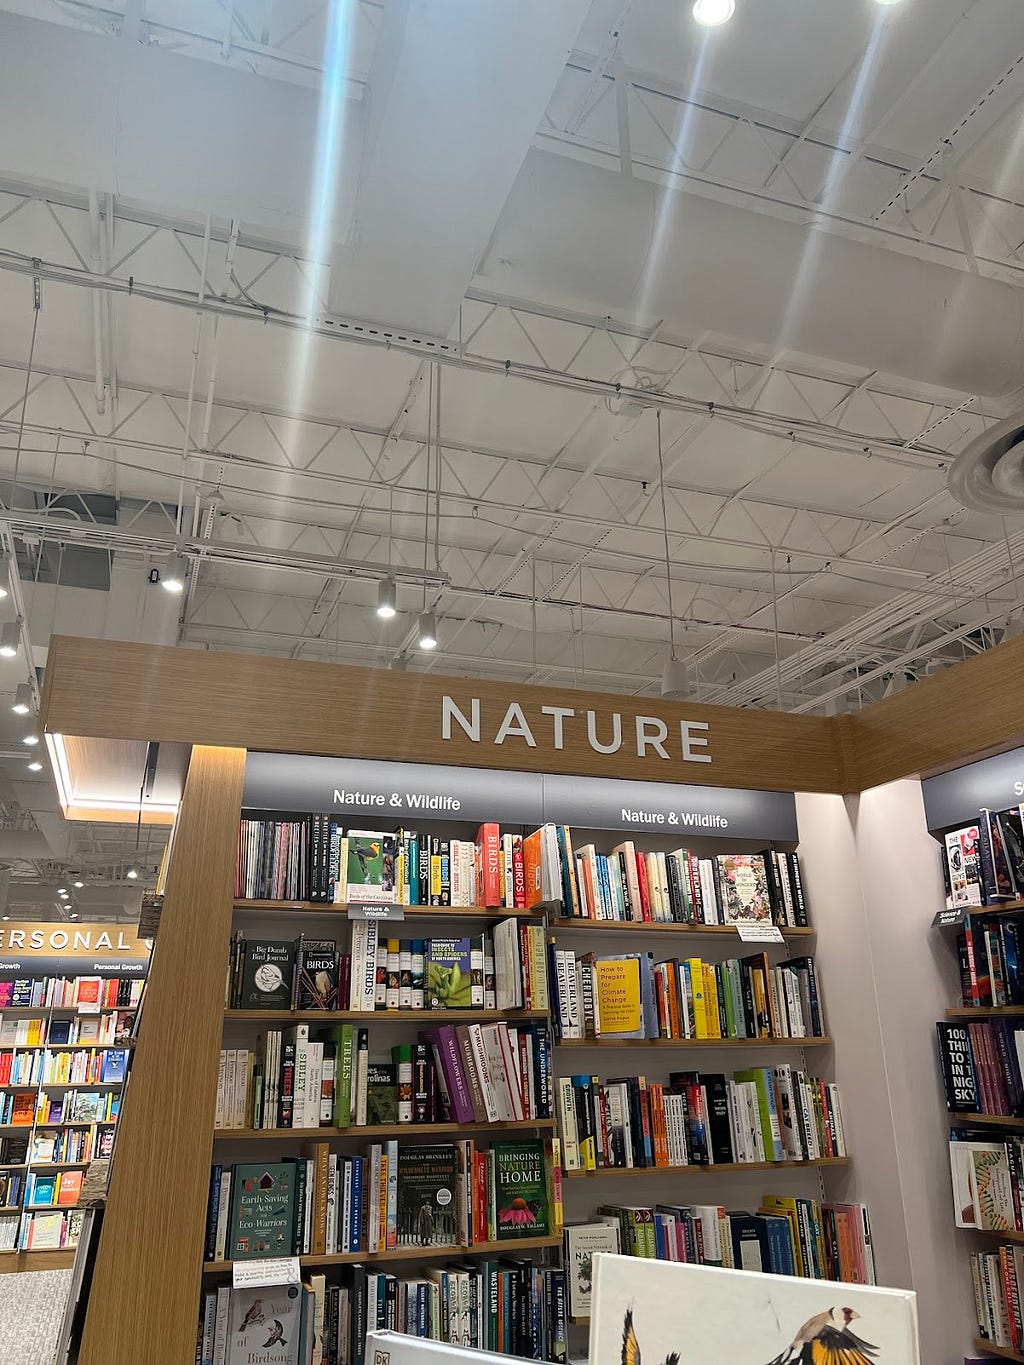 An image of the nature section of Barnes and Noble.